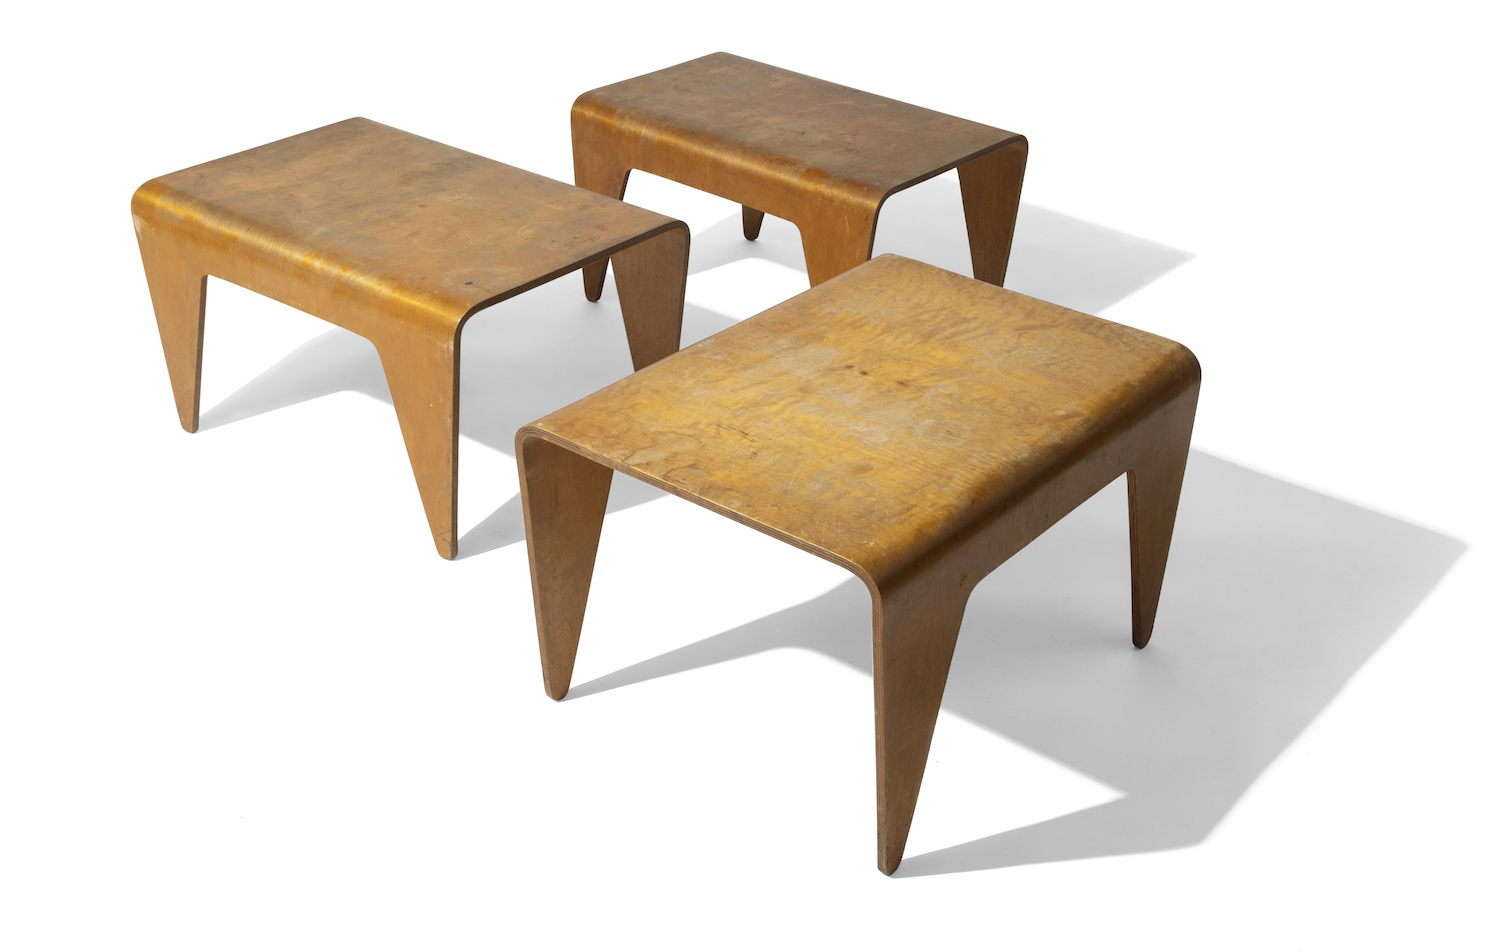 A nest of three birch plywood tables by Marcel Breuer